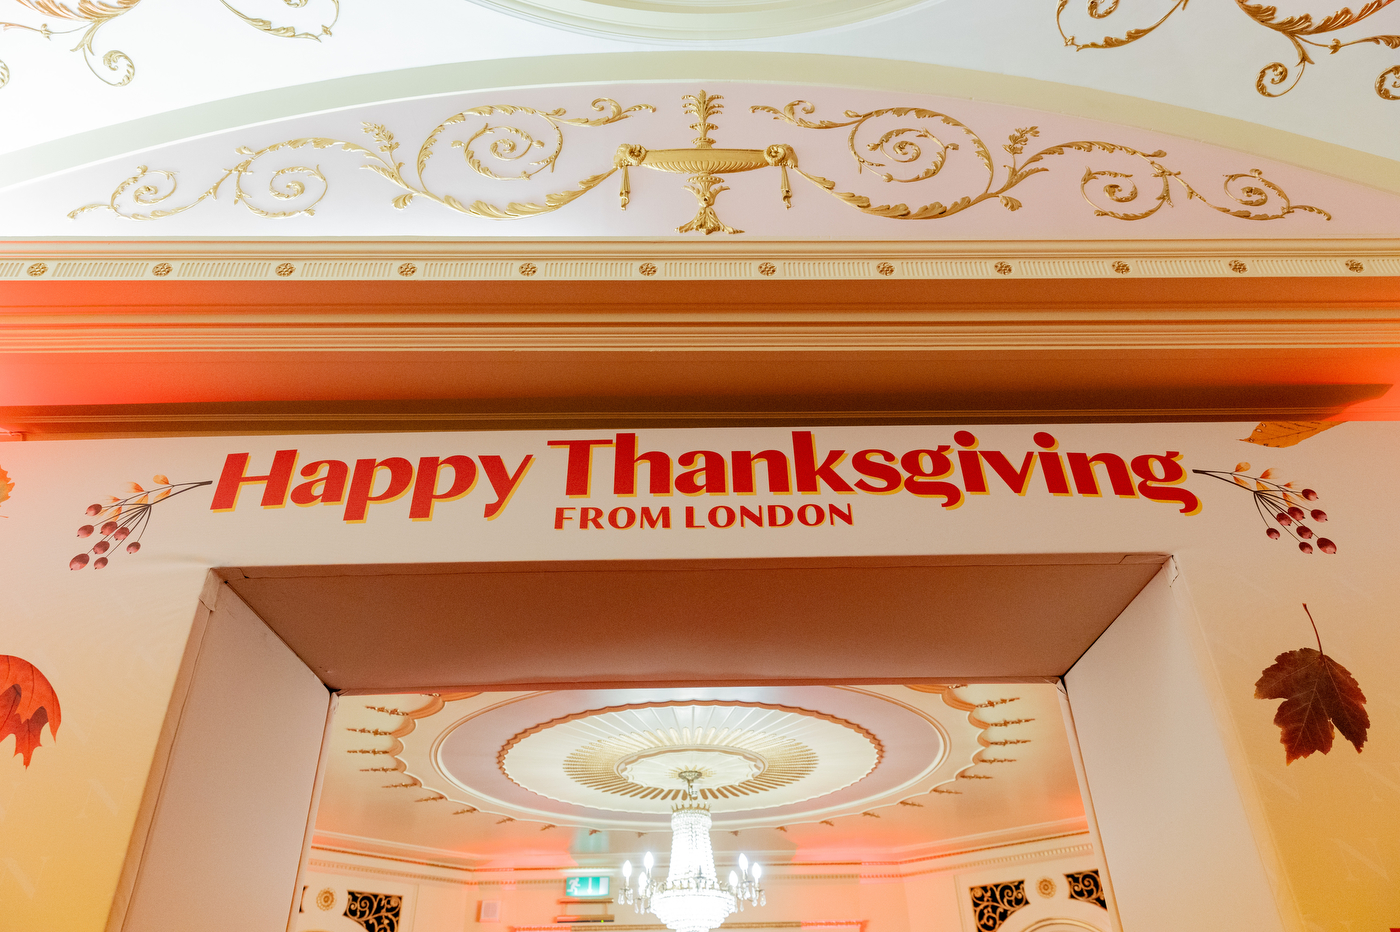 A sign with red text: "Happy Thanksgiving."